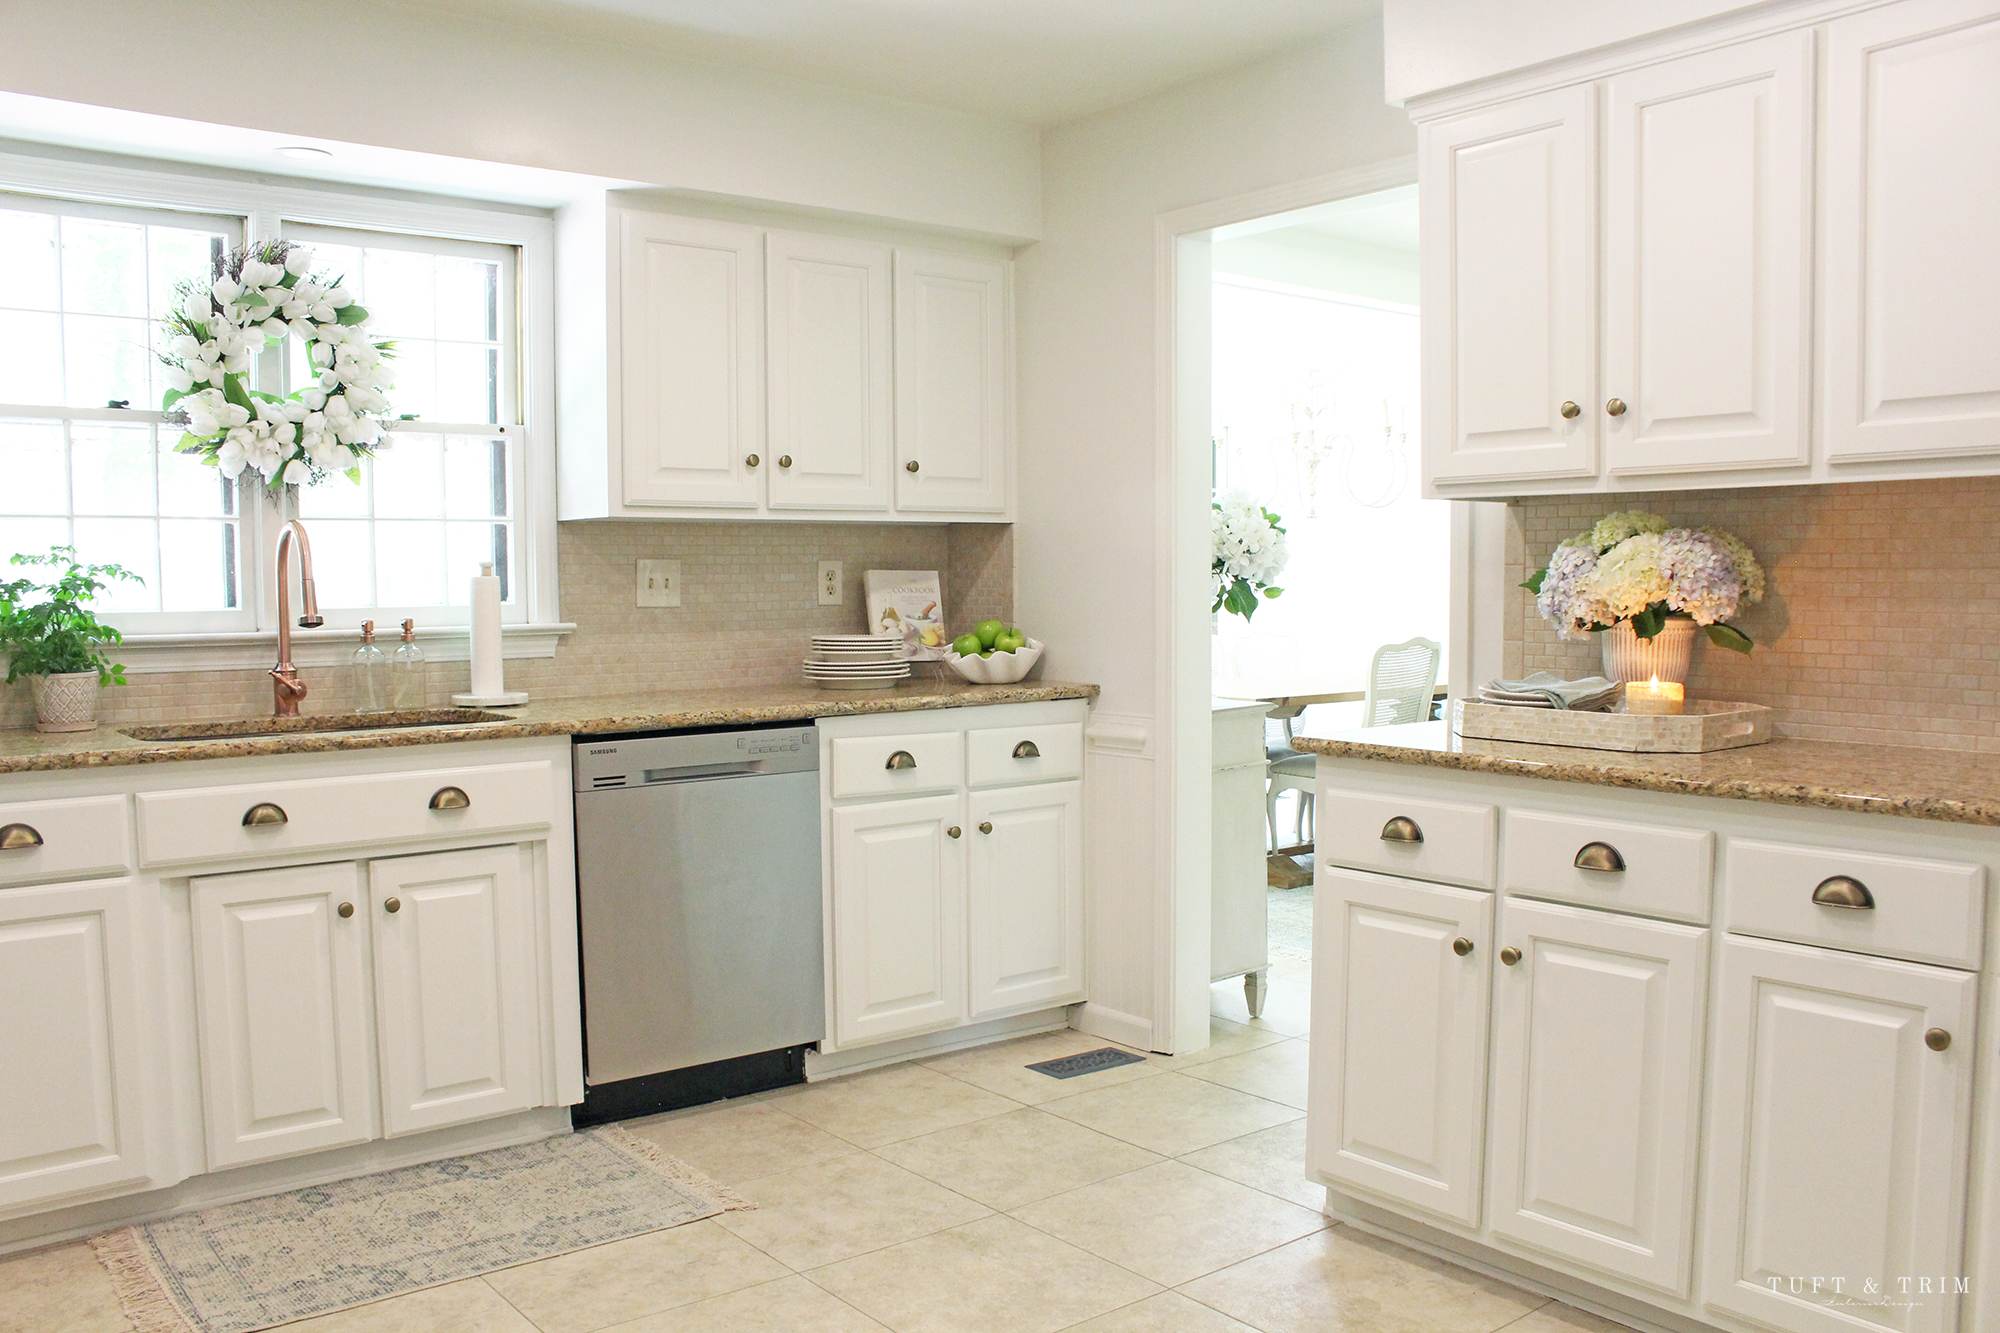 Kitchen Makeover on a Budget: Before & After